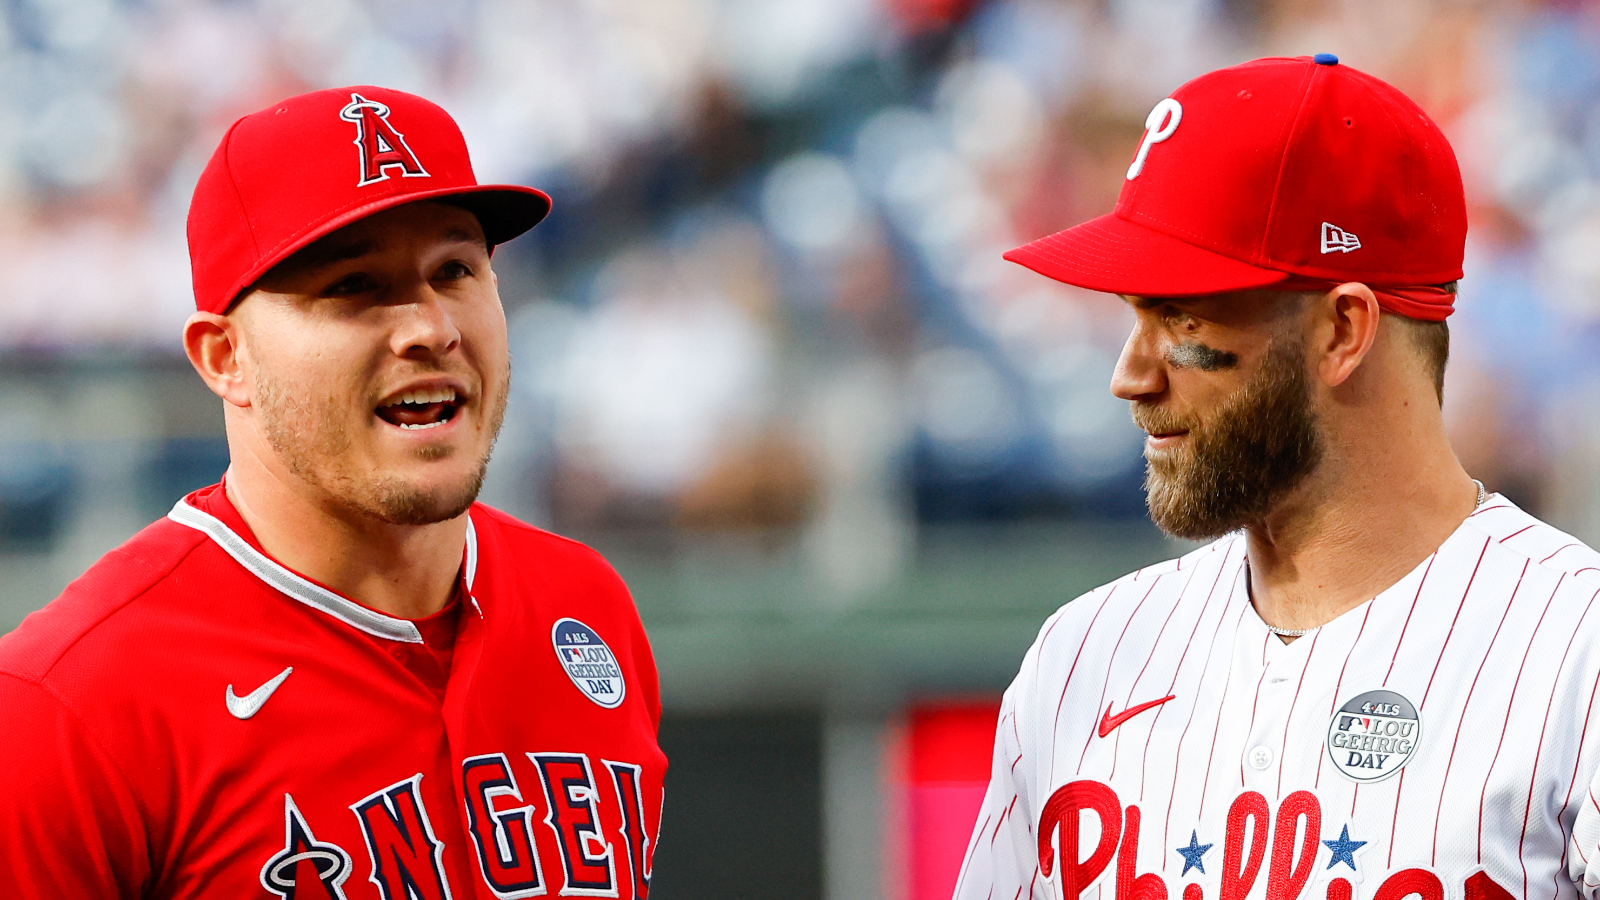 Twitter Explodes Over Bryce Harper Vs. Mike Trout Debate